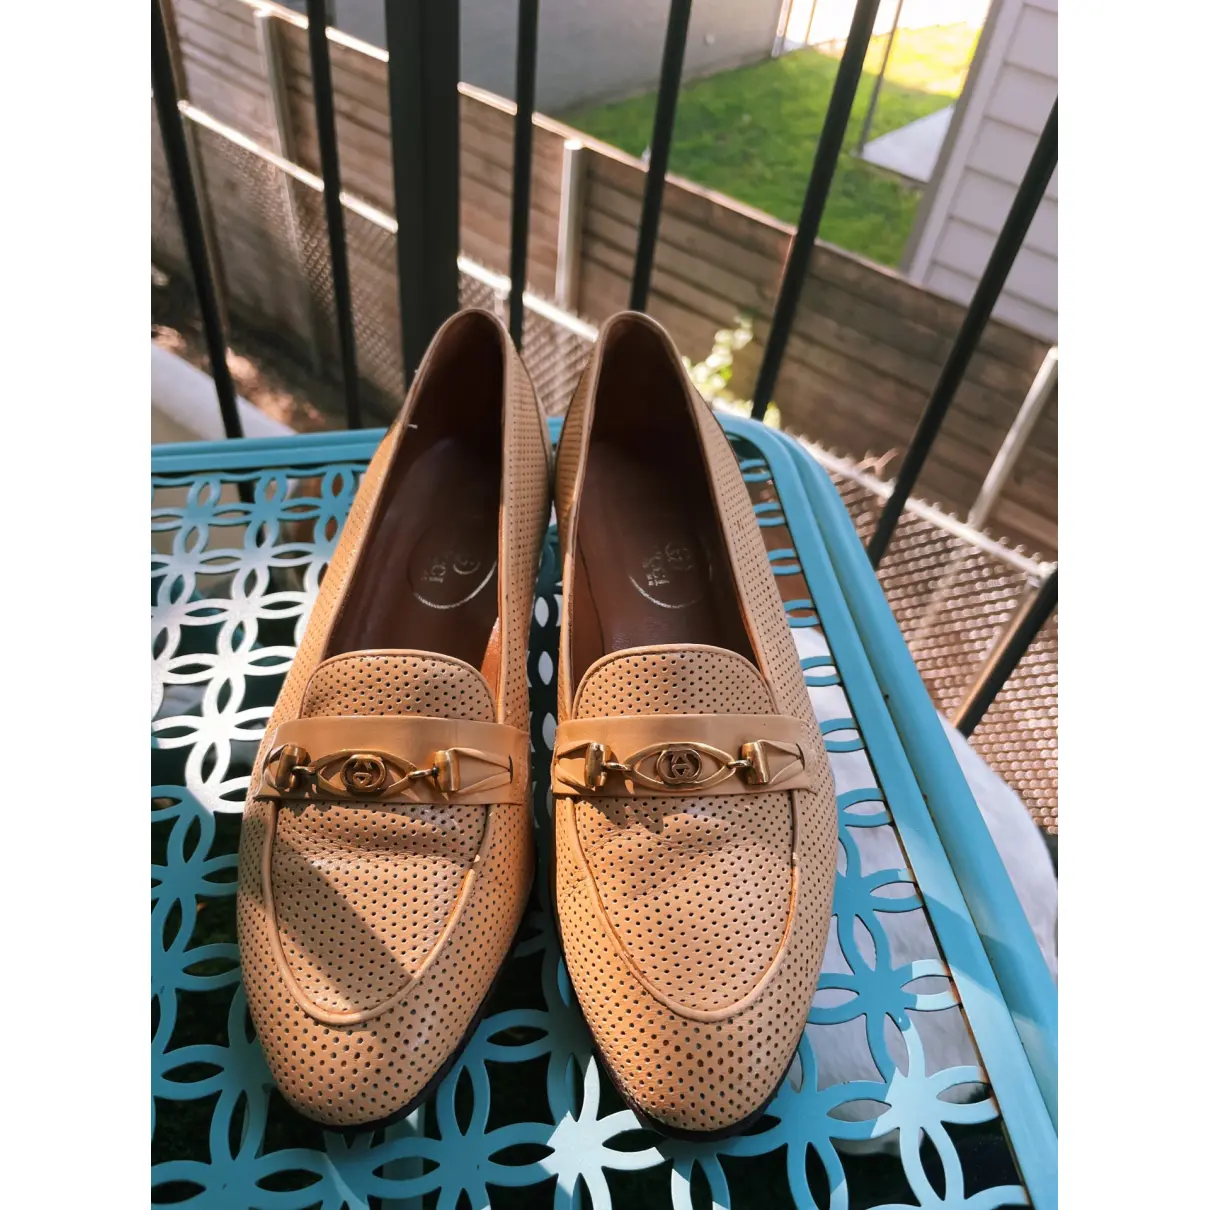 Buy Gucci Ice Lolly leather flats online - Vintage